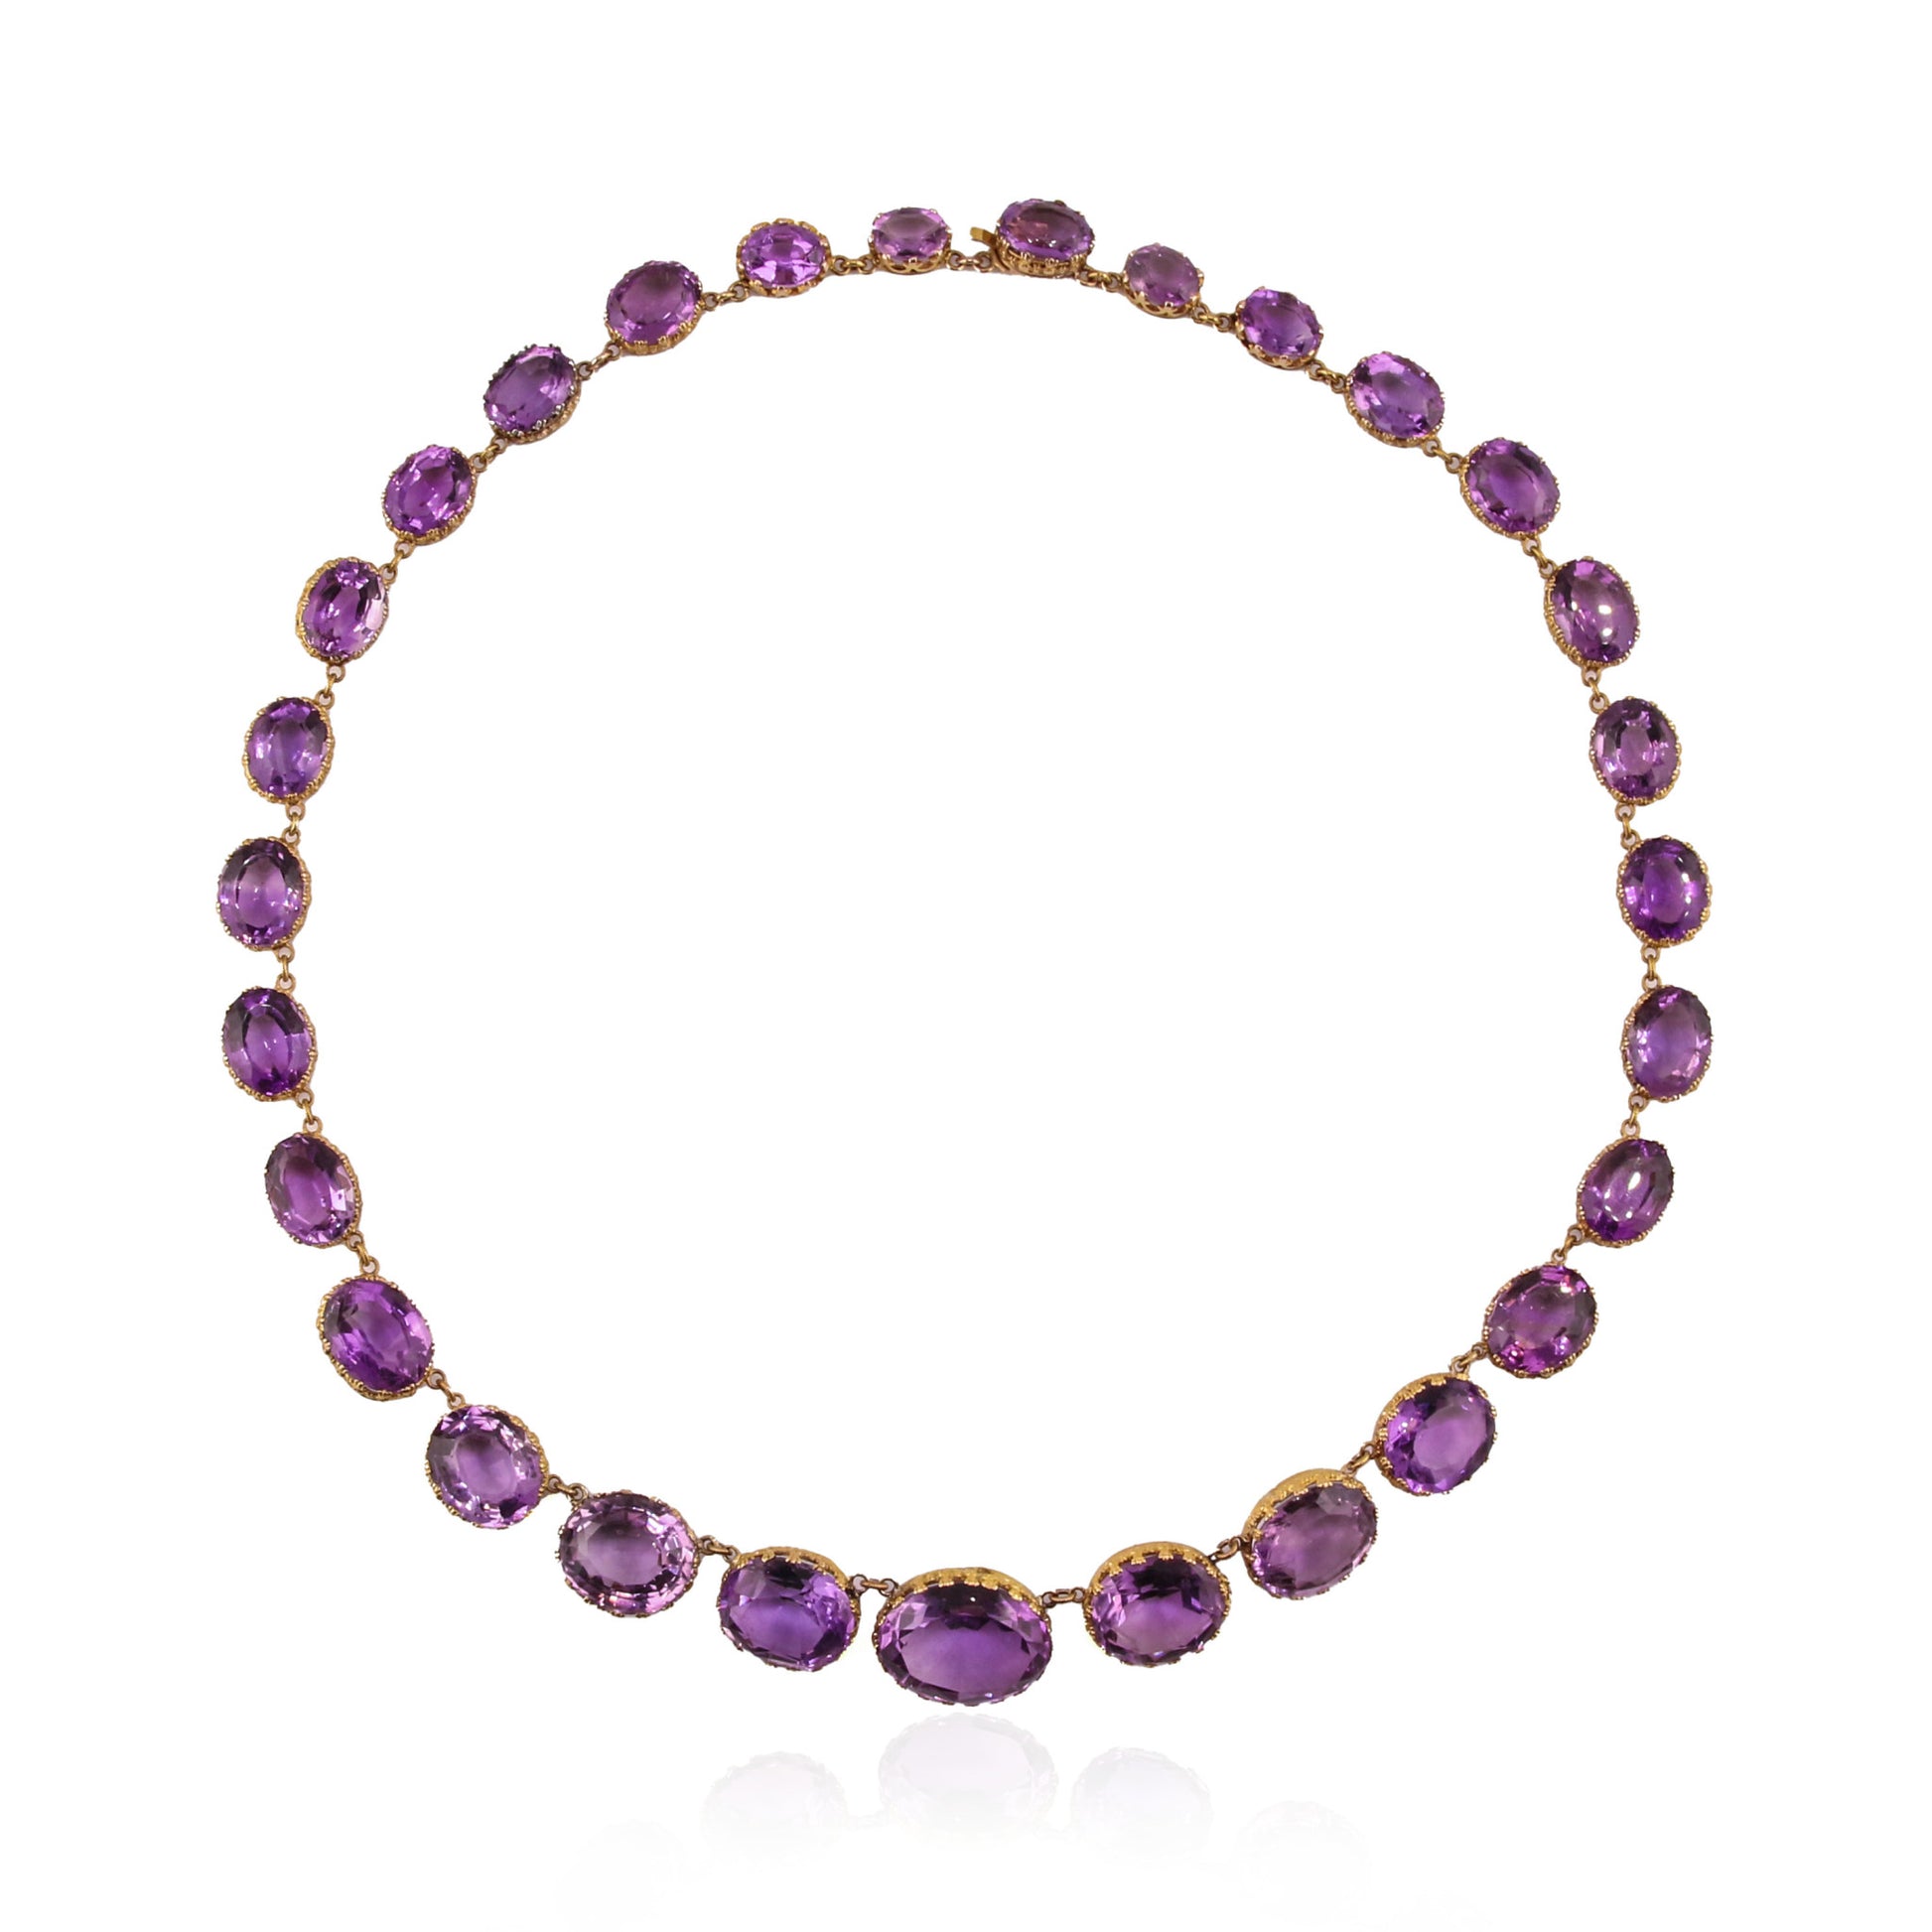 French Antique 18KT Yellow Gold Amethyst Necklace front